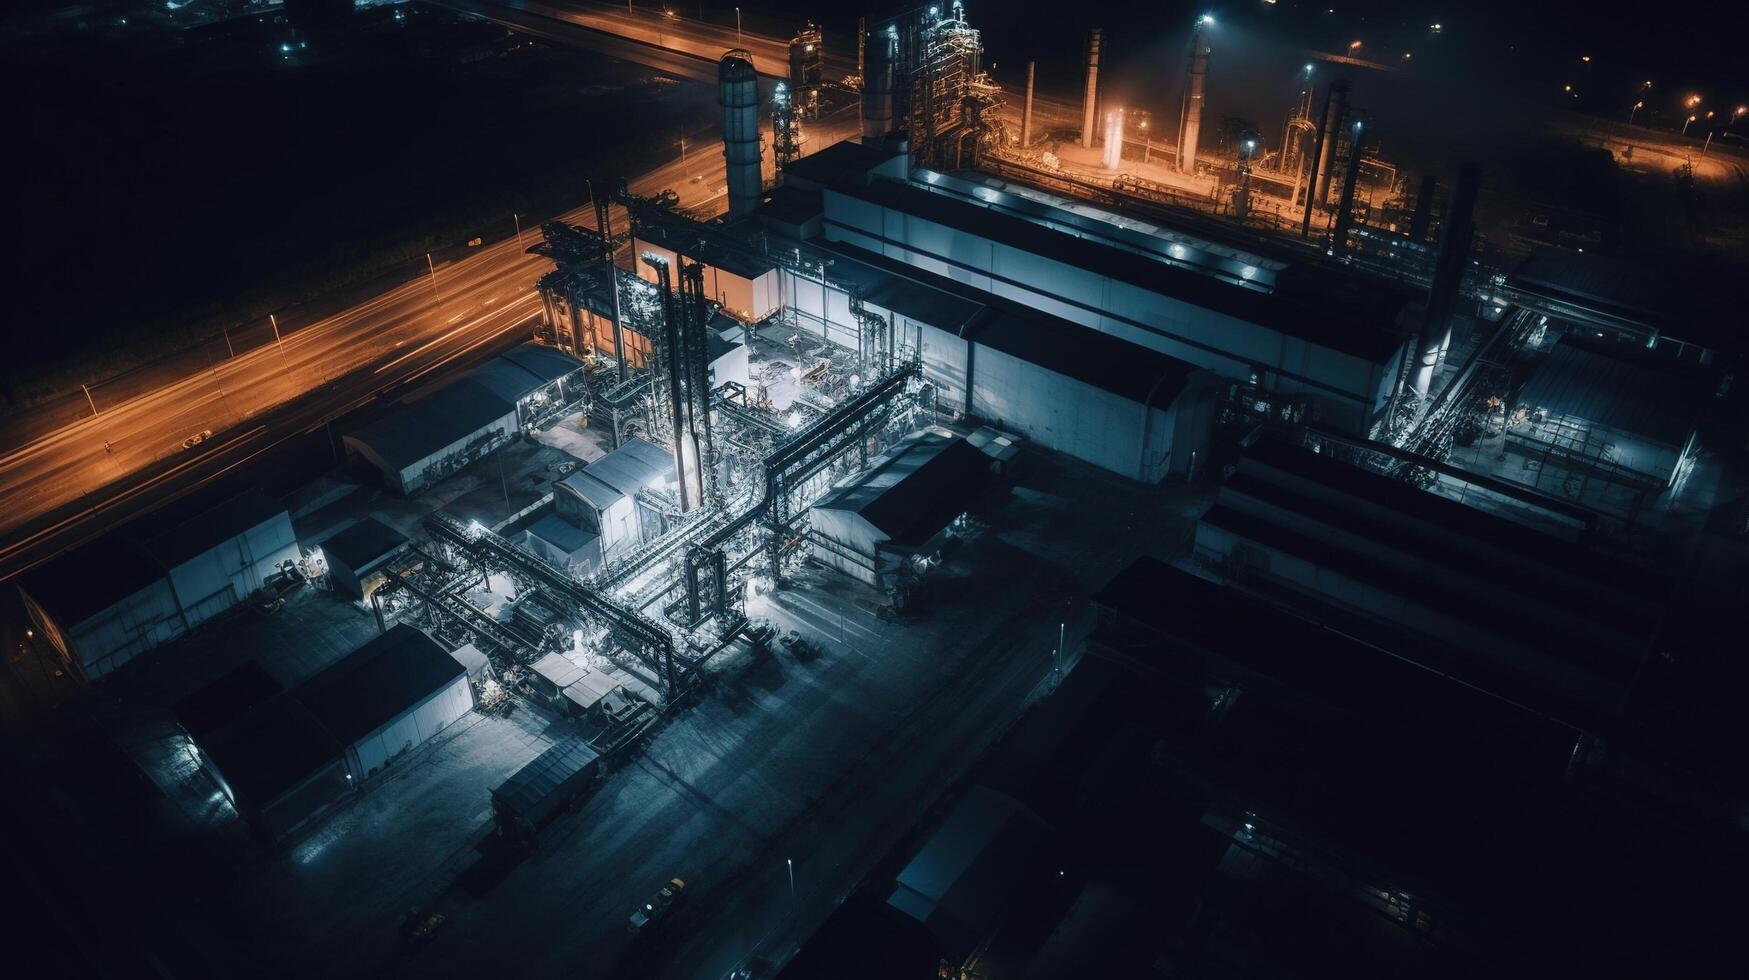 aerial view of an oil company in the night photo